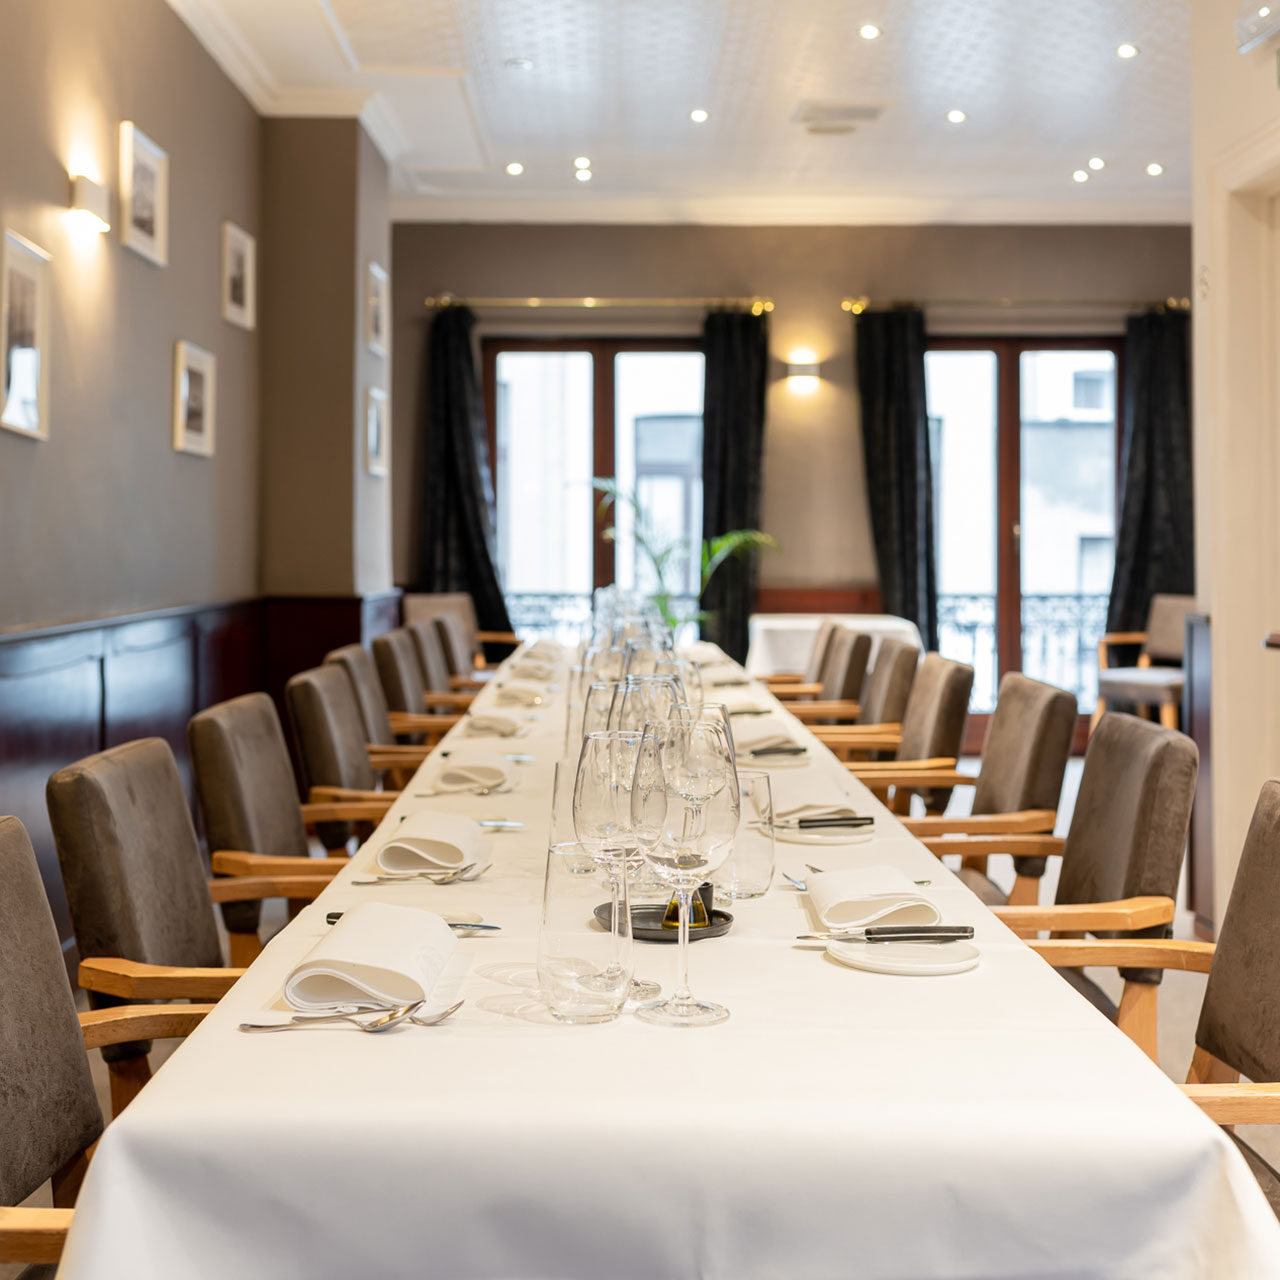 Private room - Stirwen - Etterbeek - Brussels - Gastronomic cuisine - private dining room business meals private events